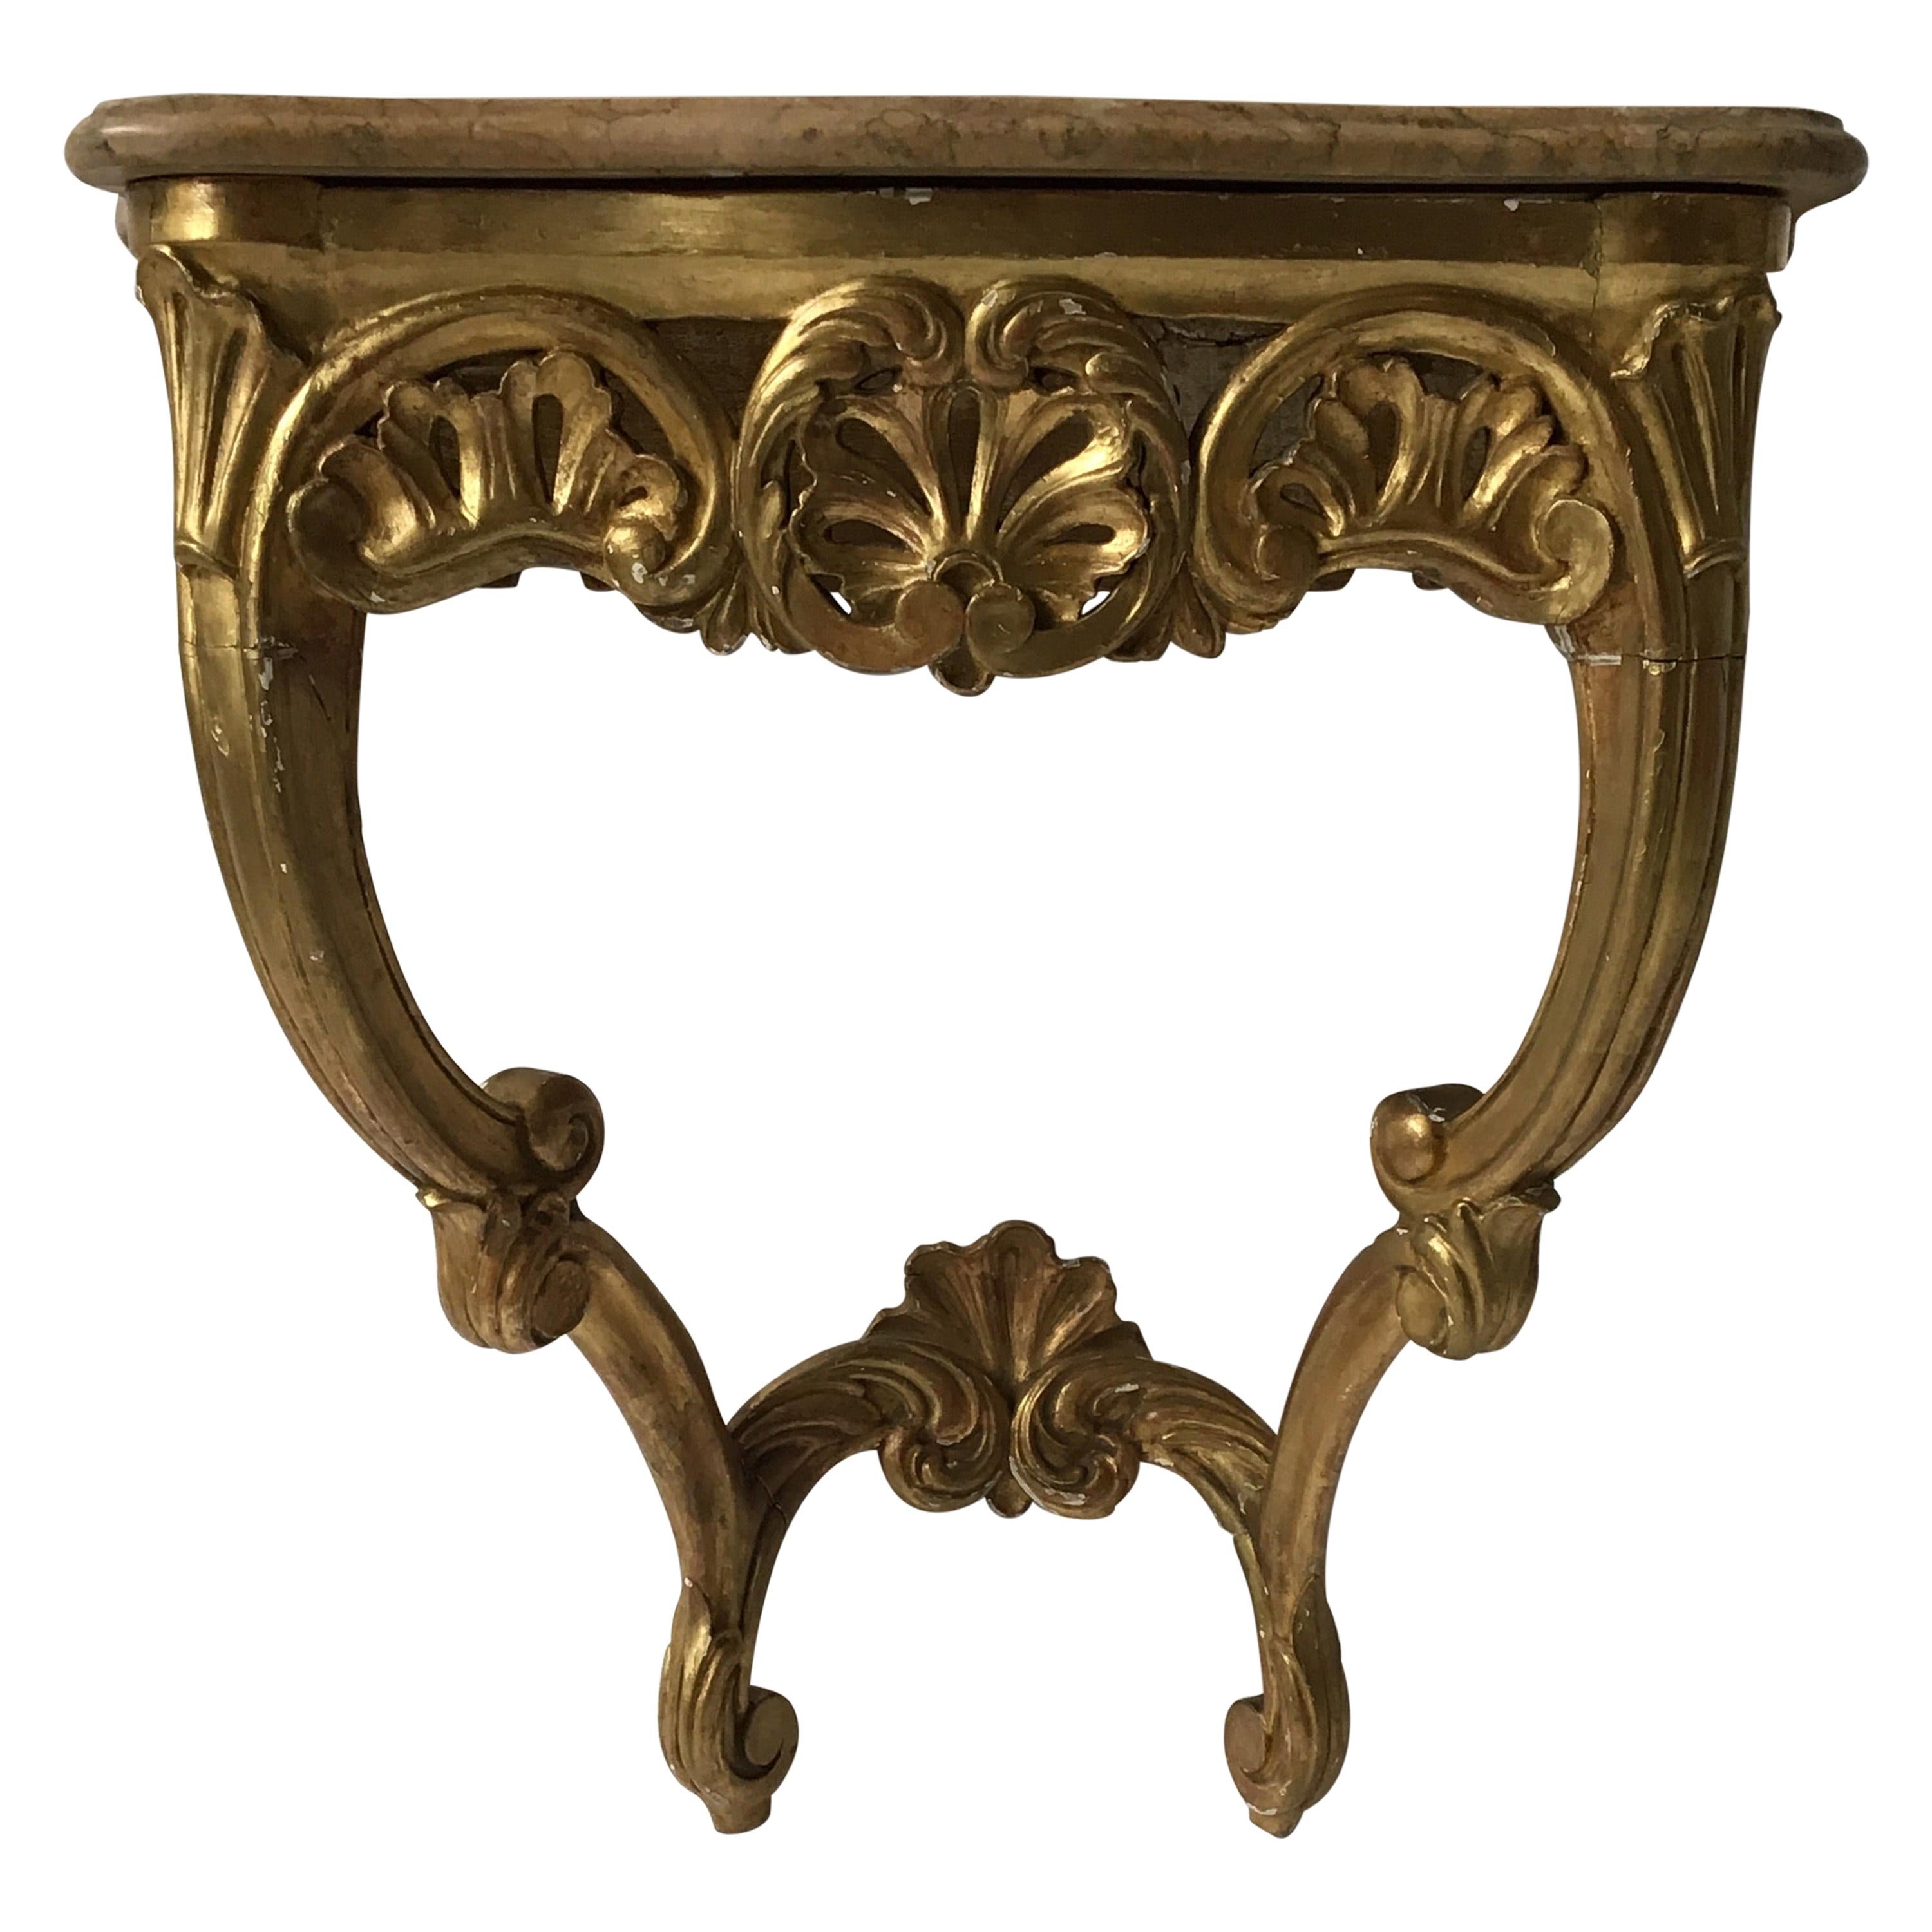 1870s French Giltwood Marble Top Wall Console